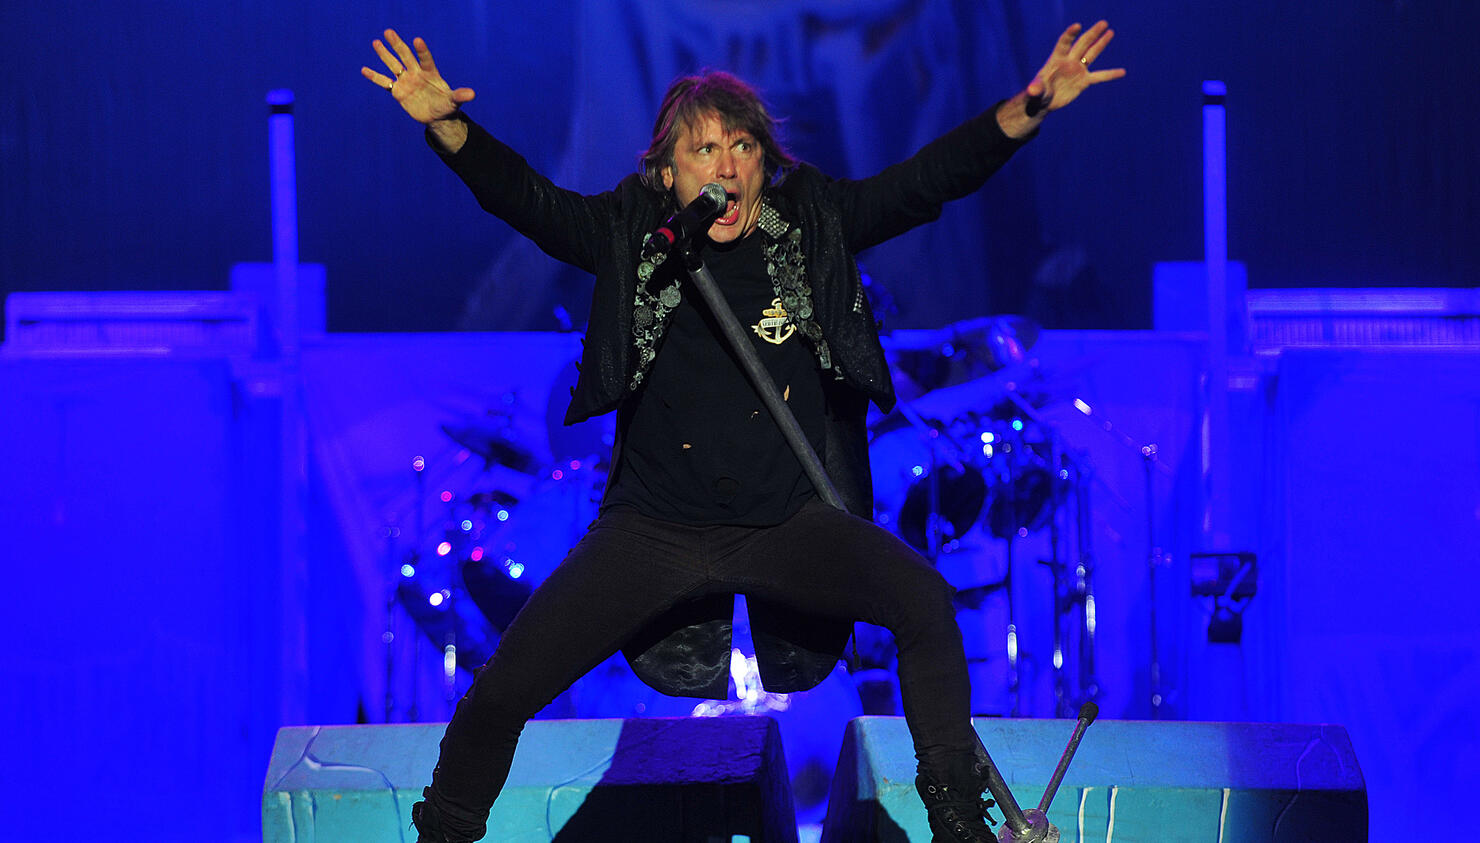 Iron Maiden S Bruce Dickinson Thankful For His Cancer Battle Iheart